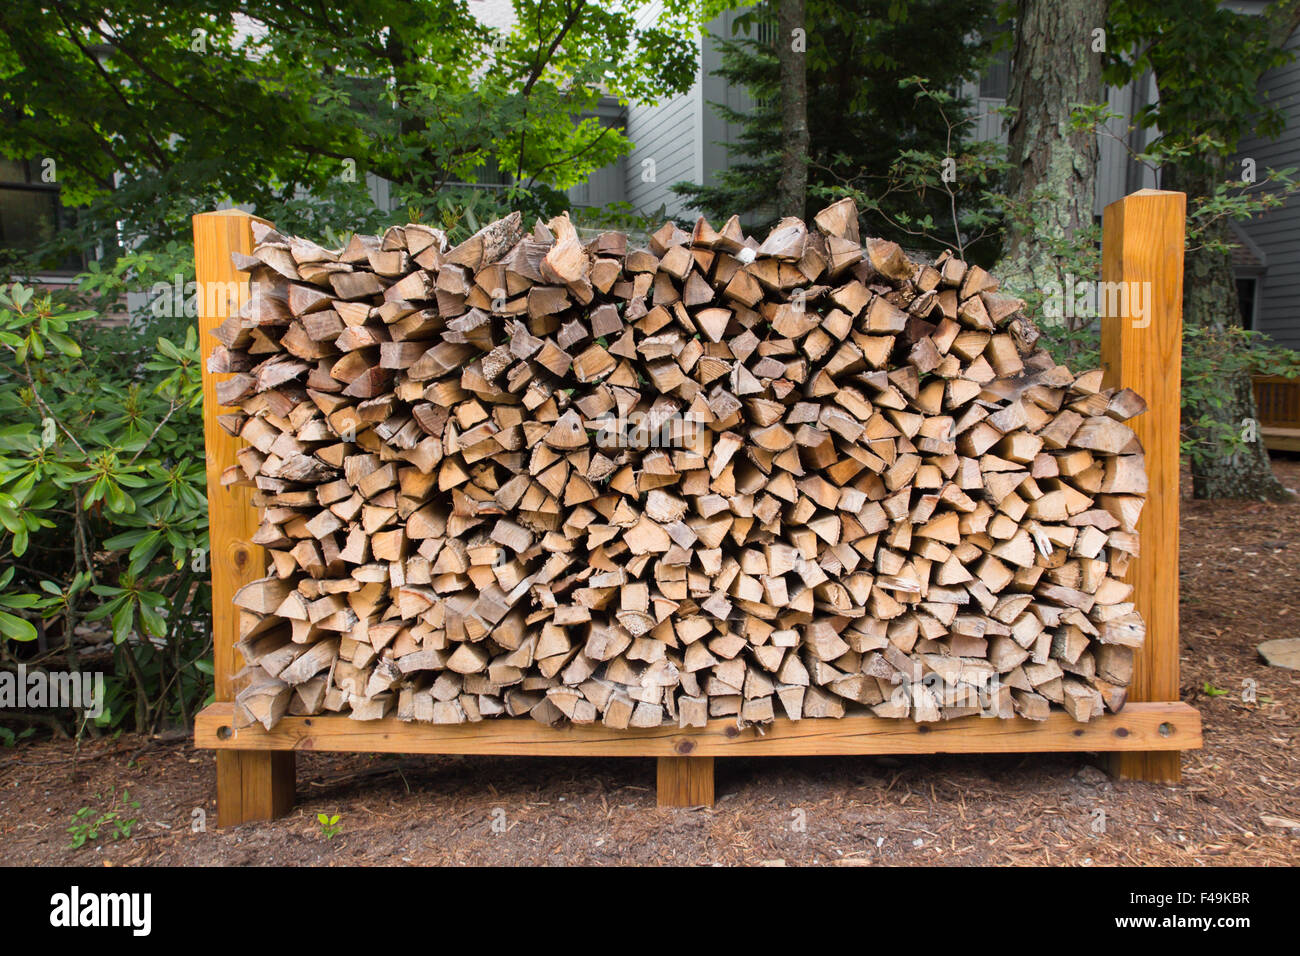 Rack of chopped logs for firewood in outdoor setting Stock Photo